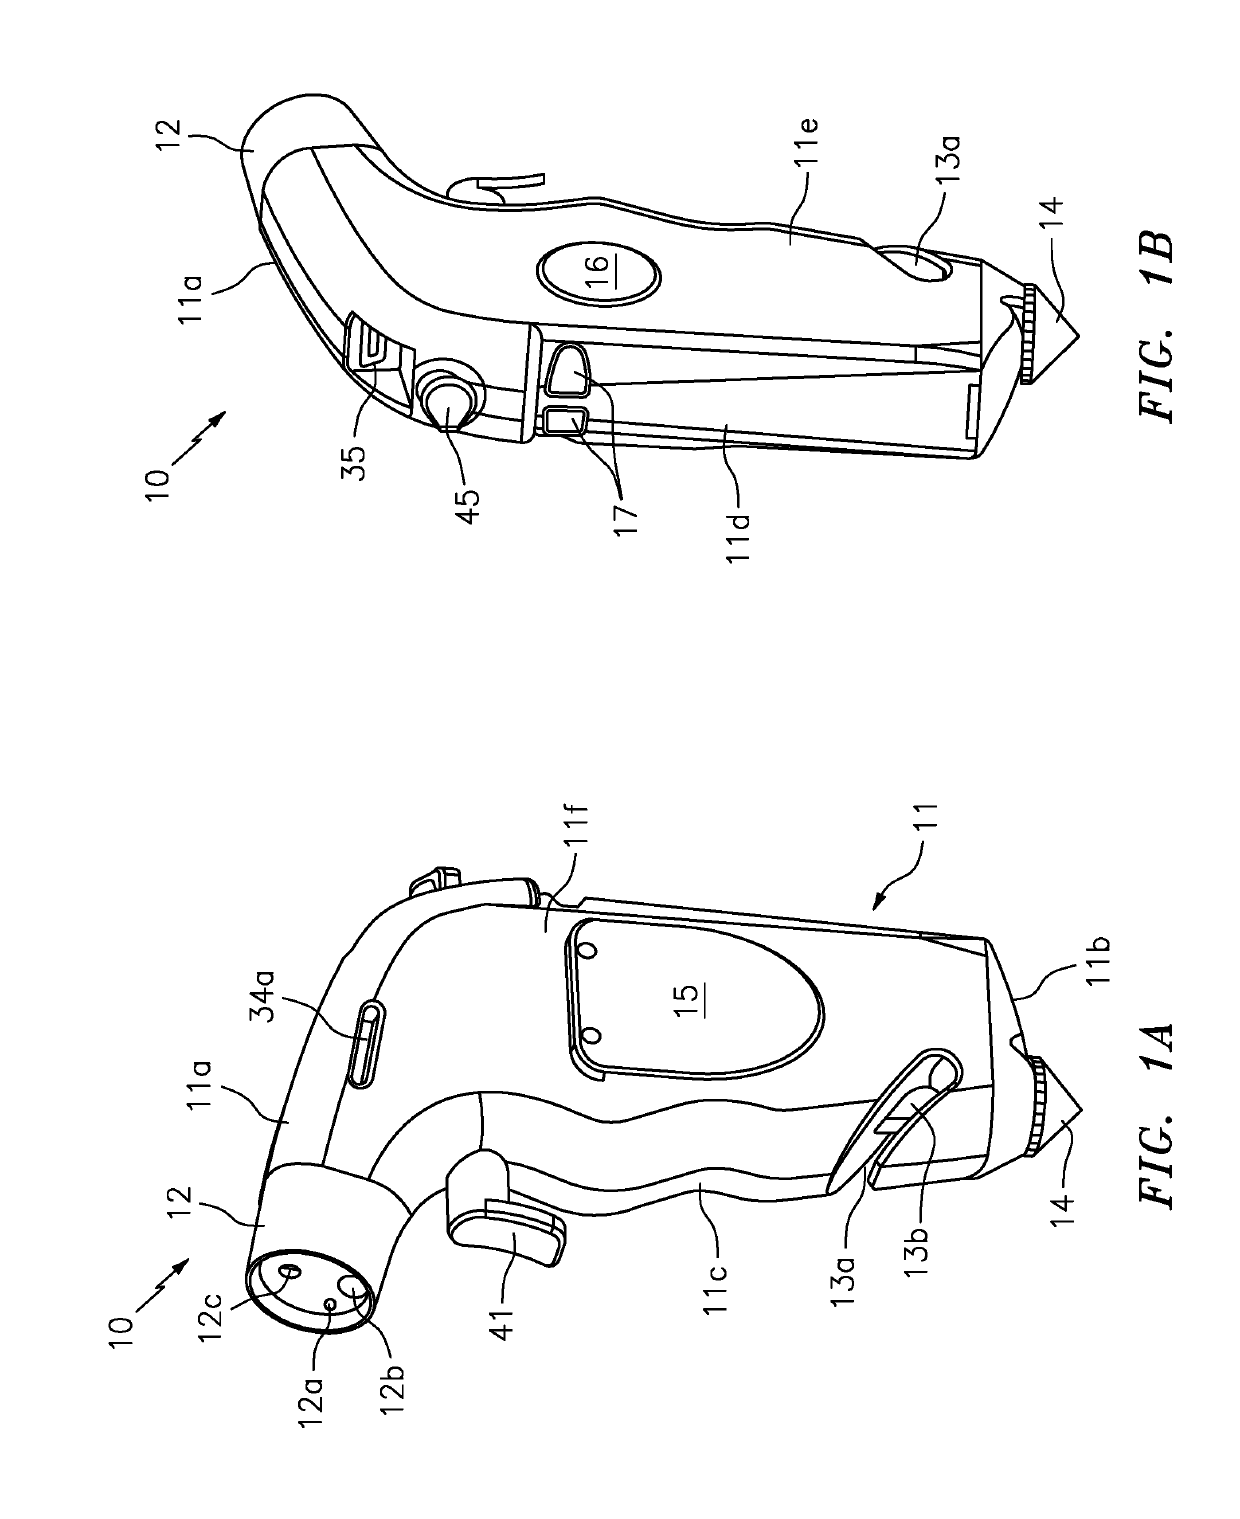 Multifunctional personal safety device